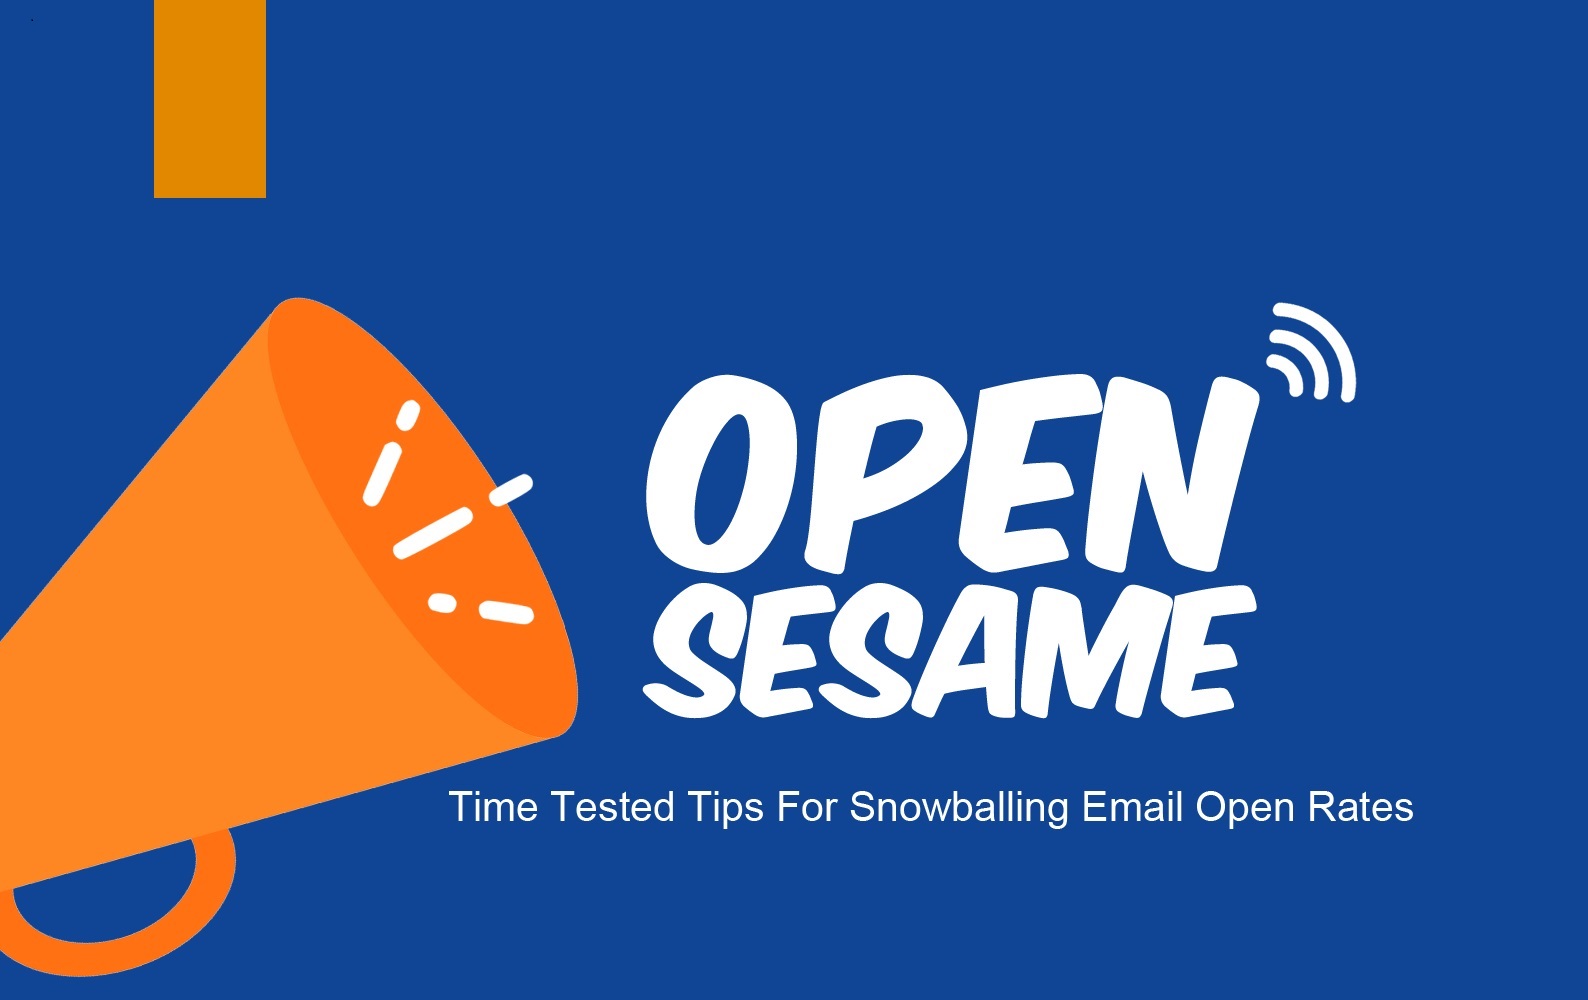 Tips to increase email open rates